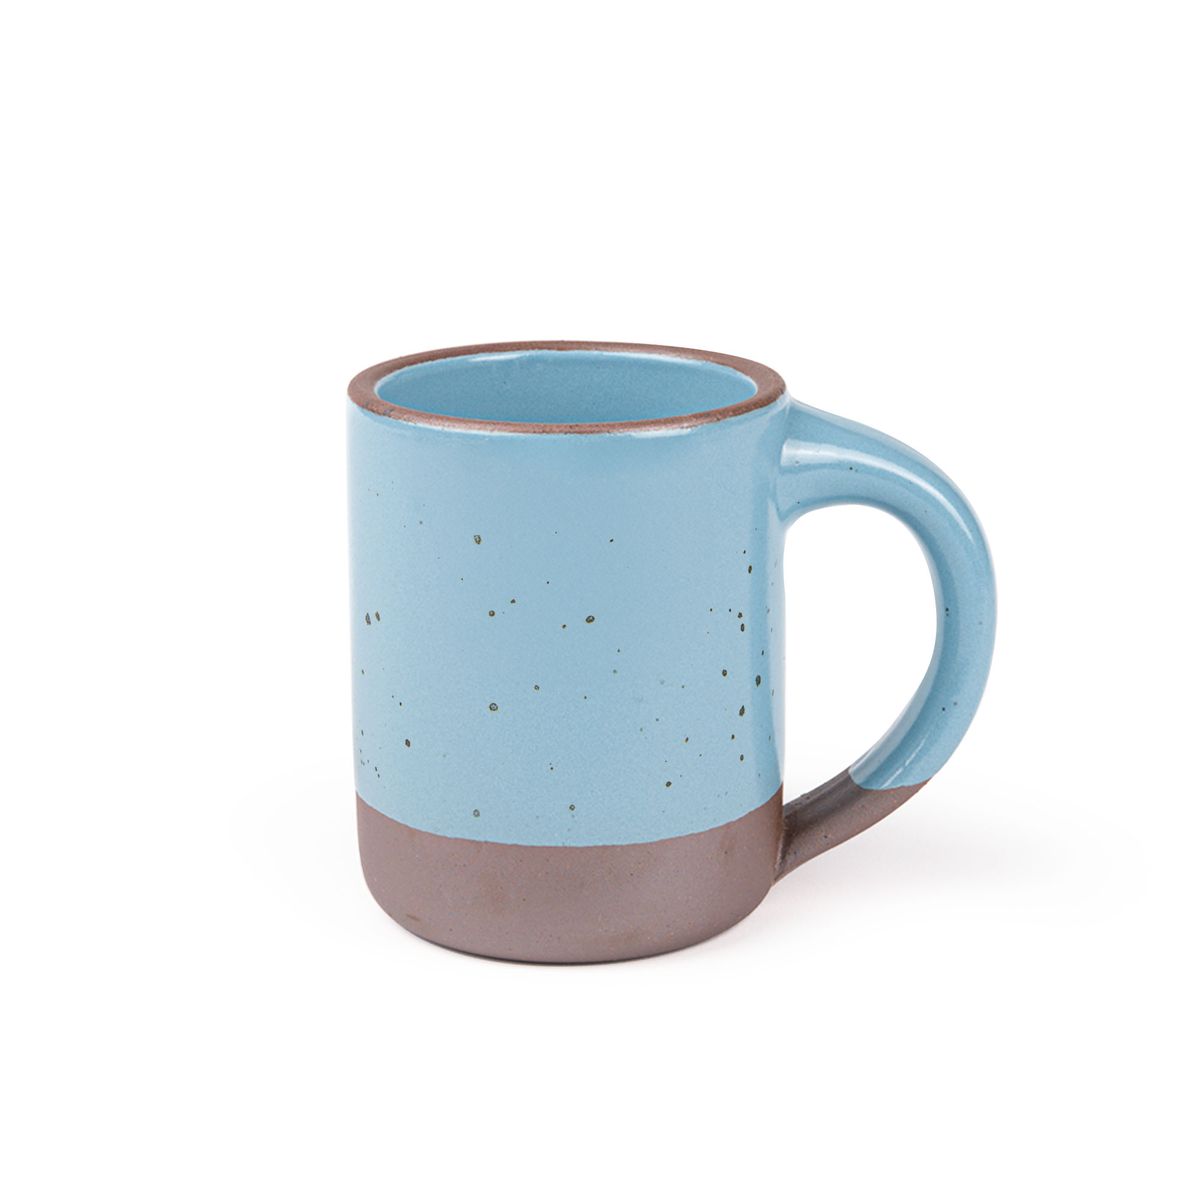 A big sized ceramic mug with handle in a robin's egg blue color featuring iron speckles and unglazed rim and bottom base.